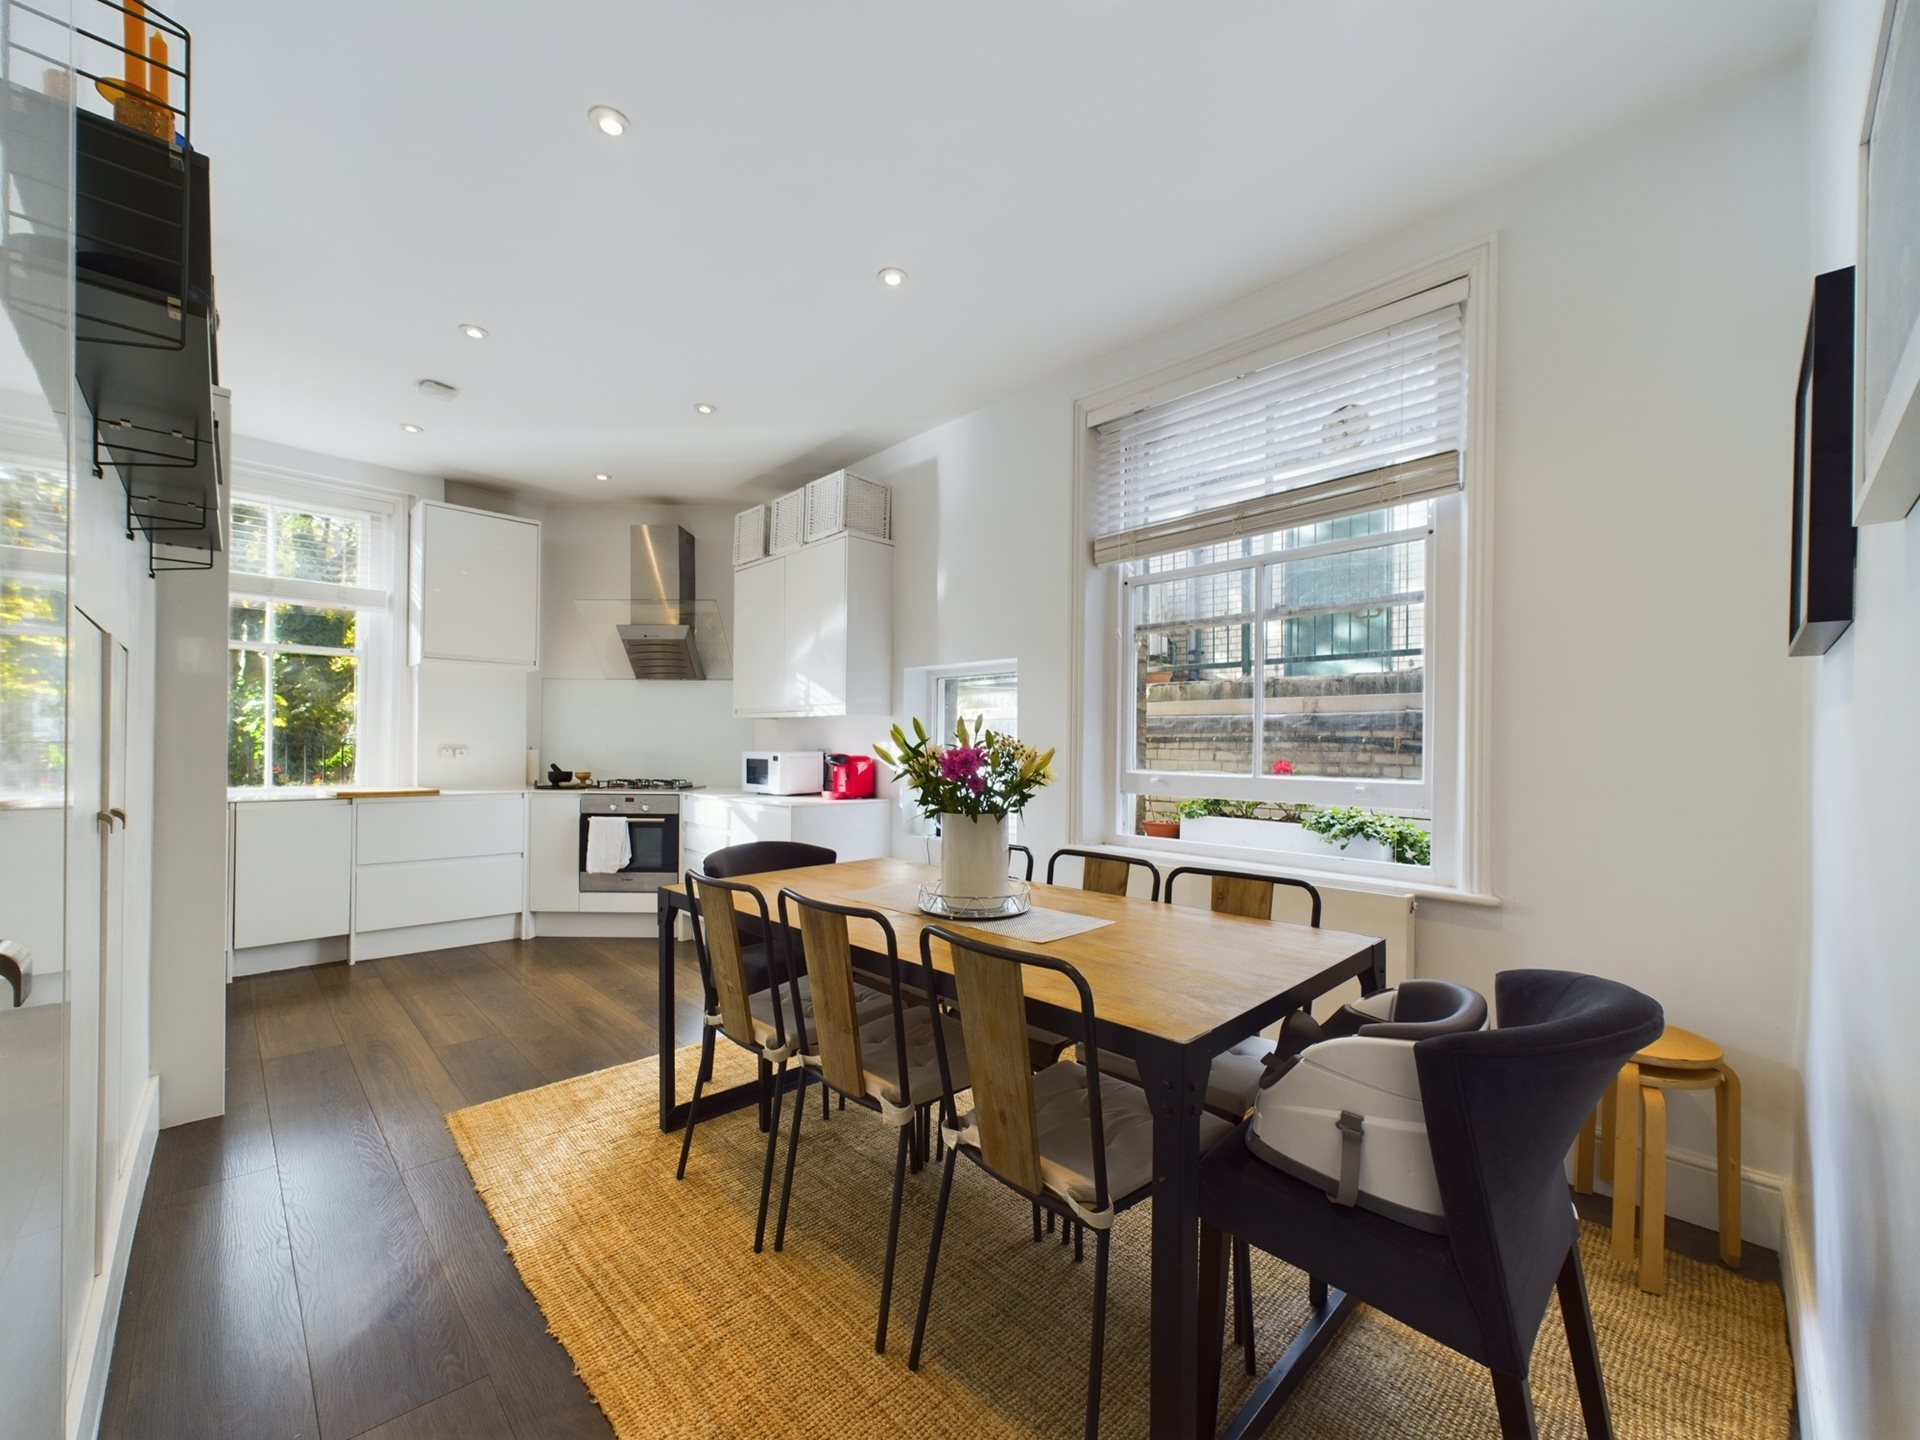 Cleveland Mansions, Widley Road, London, W9 1 bedroom flat/apartment in Widley Road